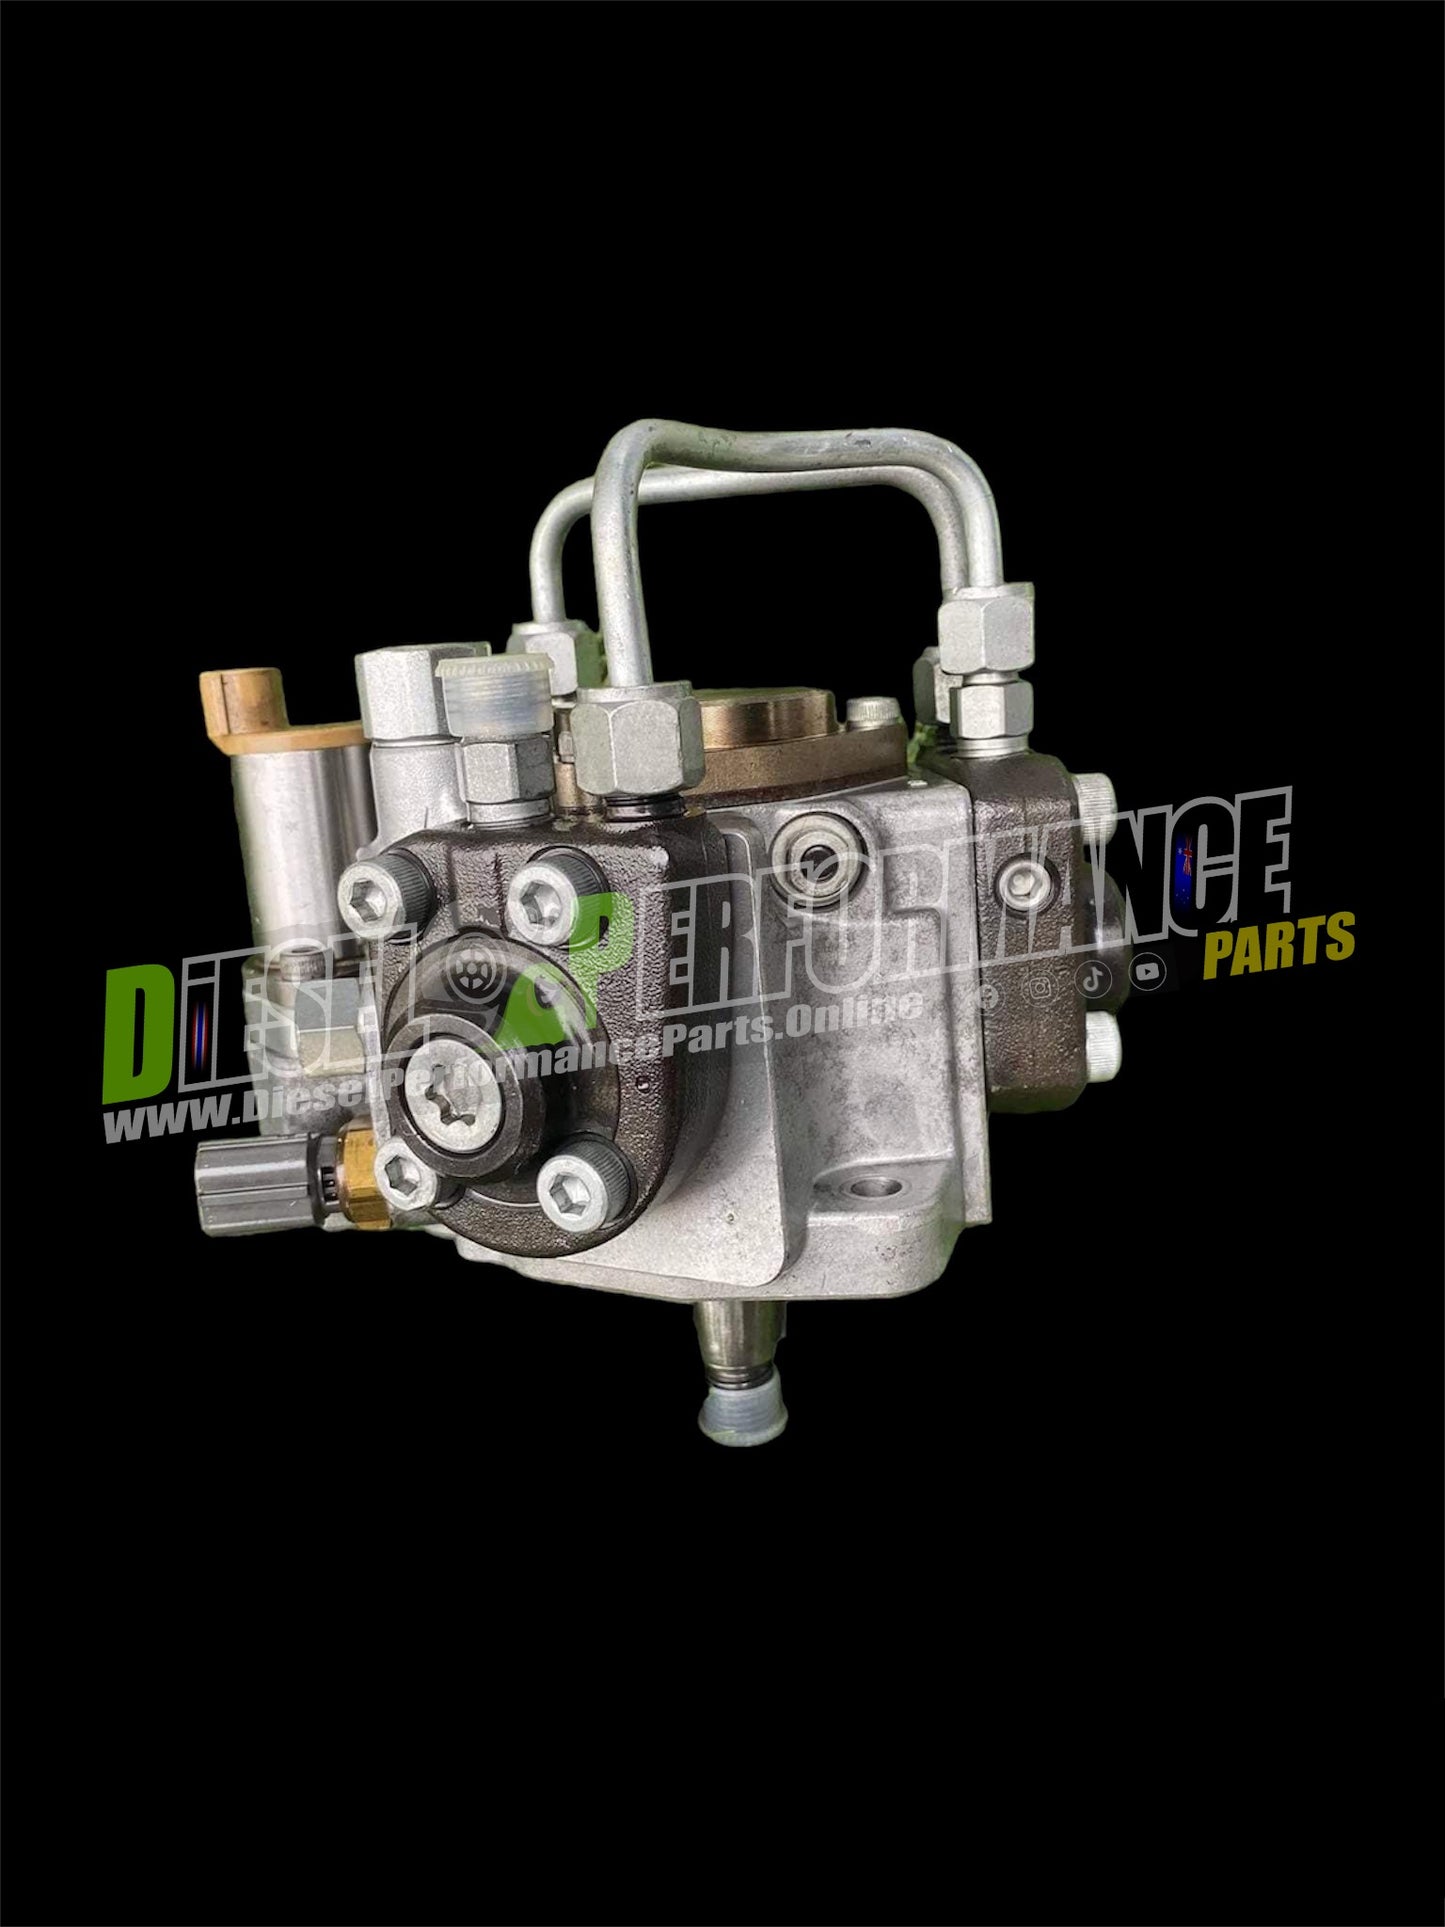 3 Rotor Custom Mod Pump [BYP] Rated 600HP+ (Denso)